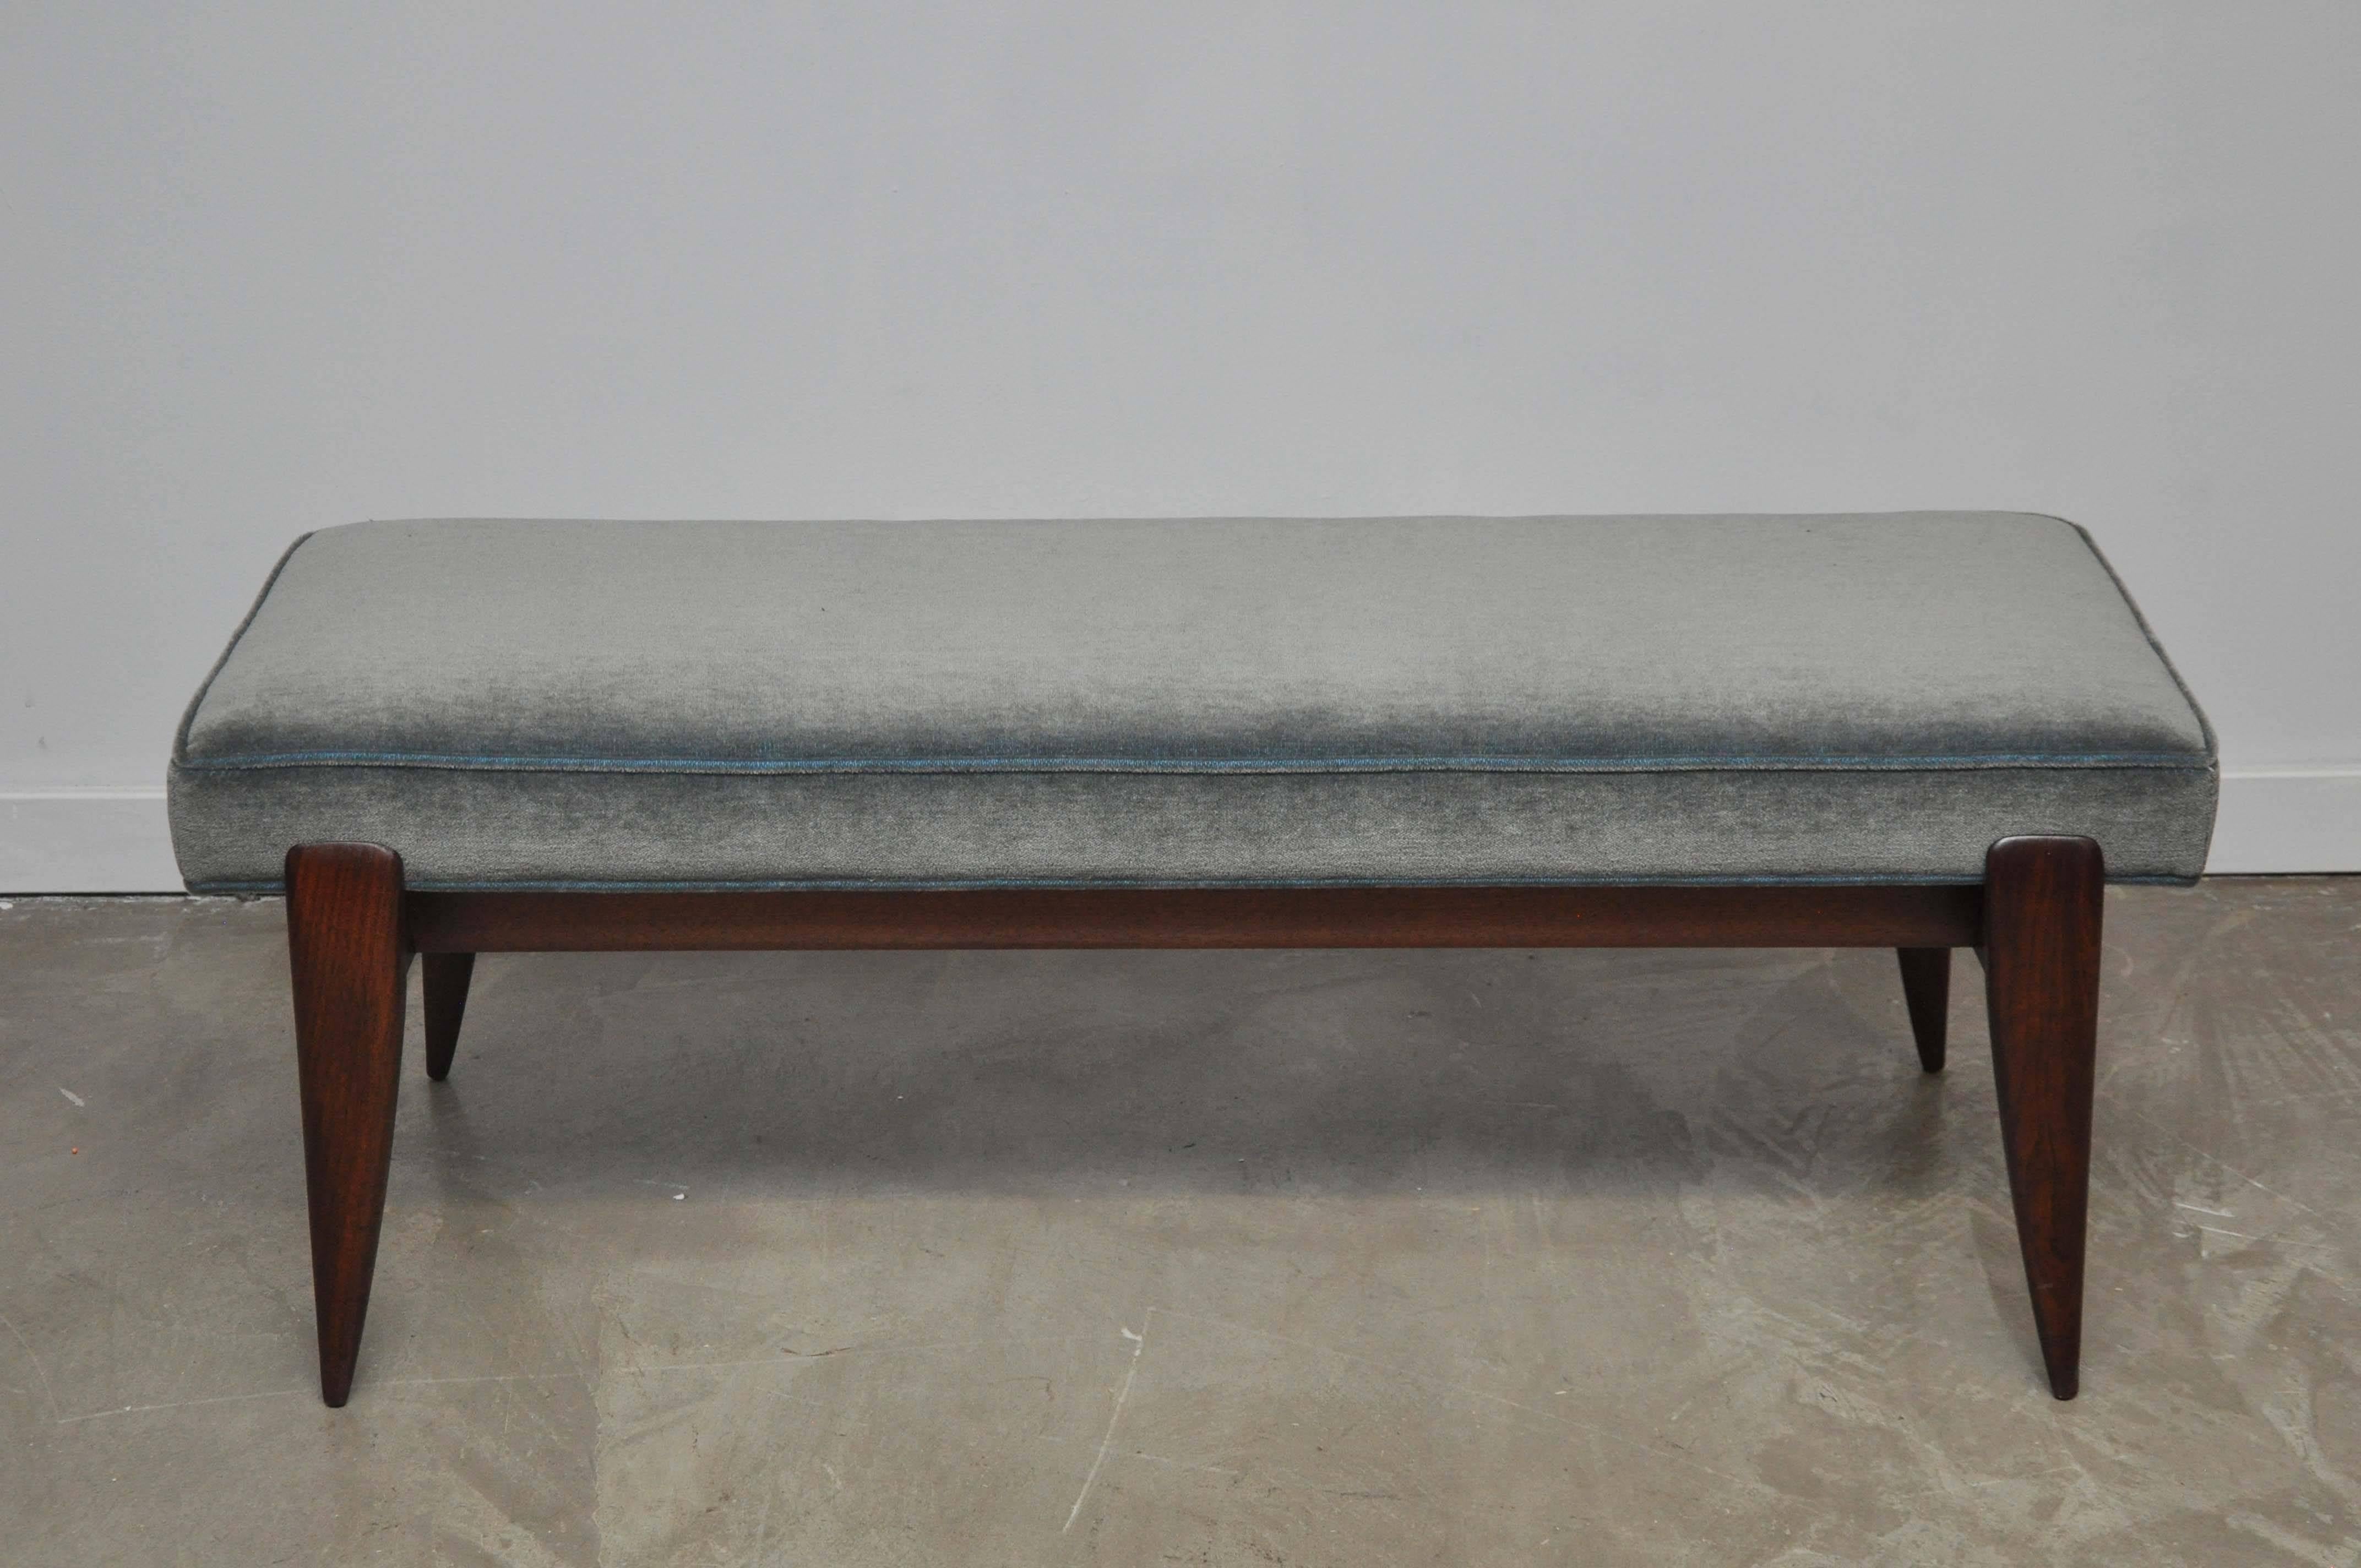 Beautiful bench designed by Gio Ponti for M. Singer and Sons. Fully restored. Sculptural walnut base with new blue/grey mohair upholstery. Original label present on underside.